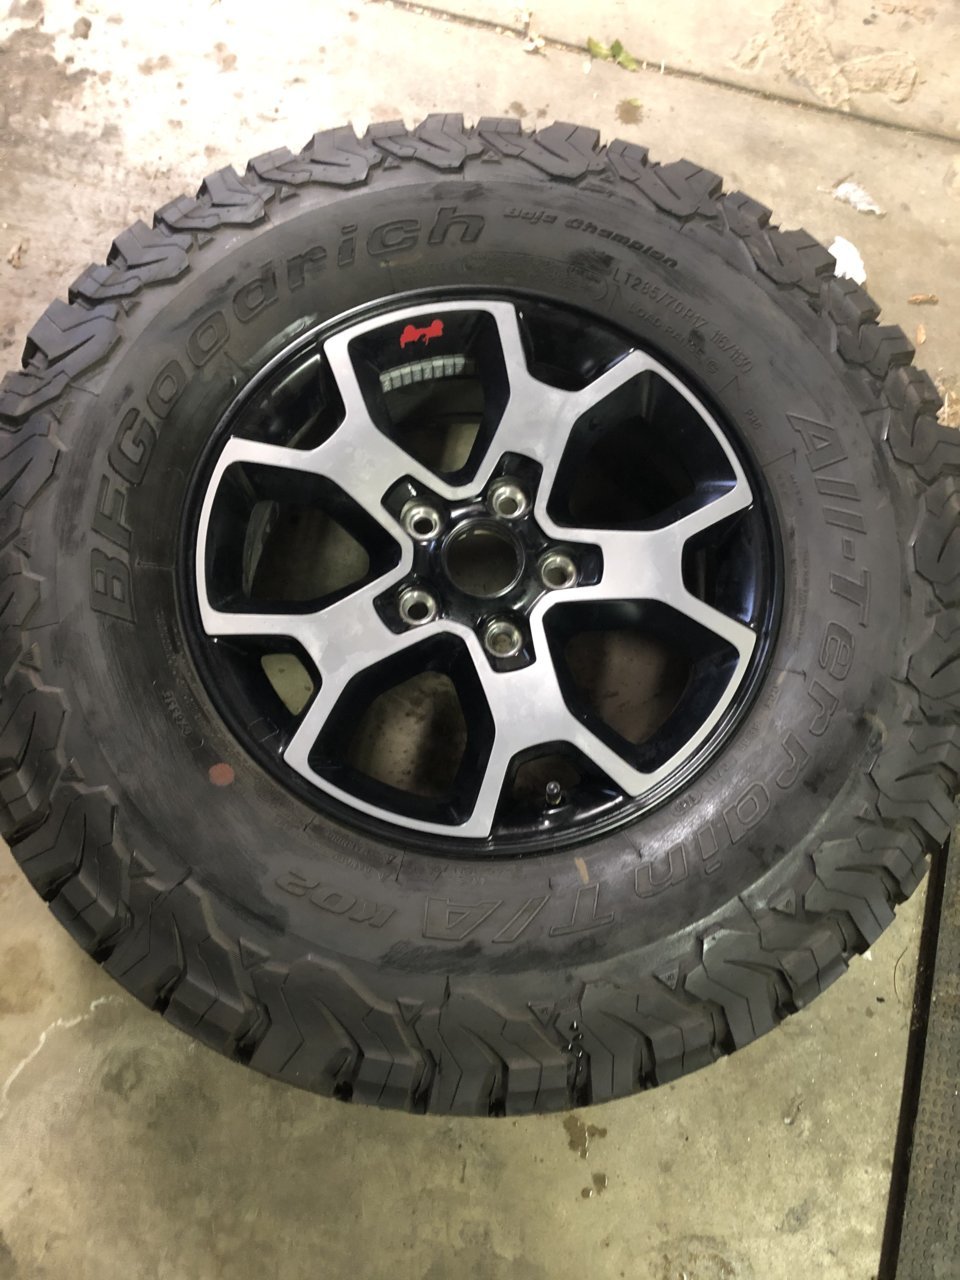 2019 Stock Jeep Rubicon 5 Wheels And Tires Used 2000 Miles Only